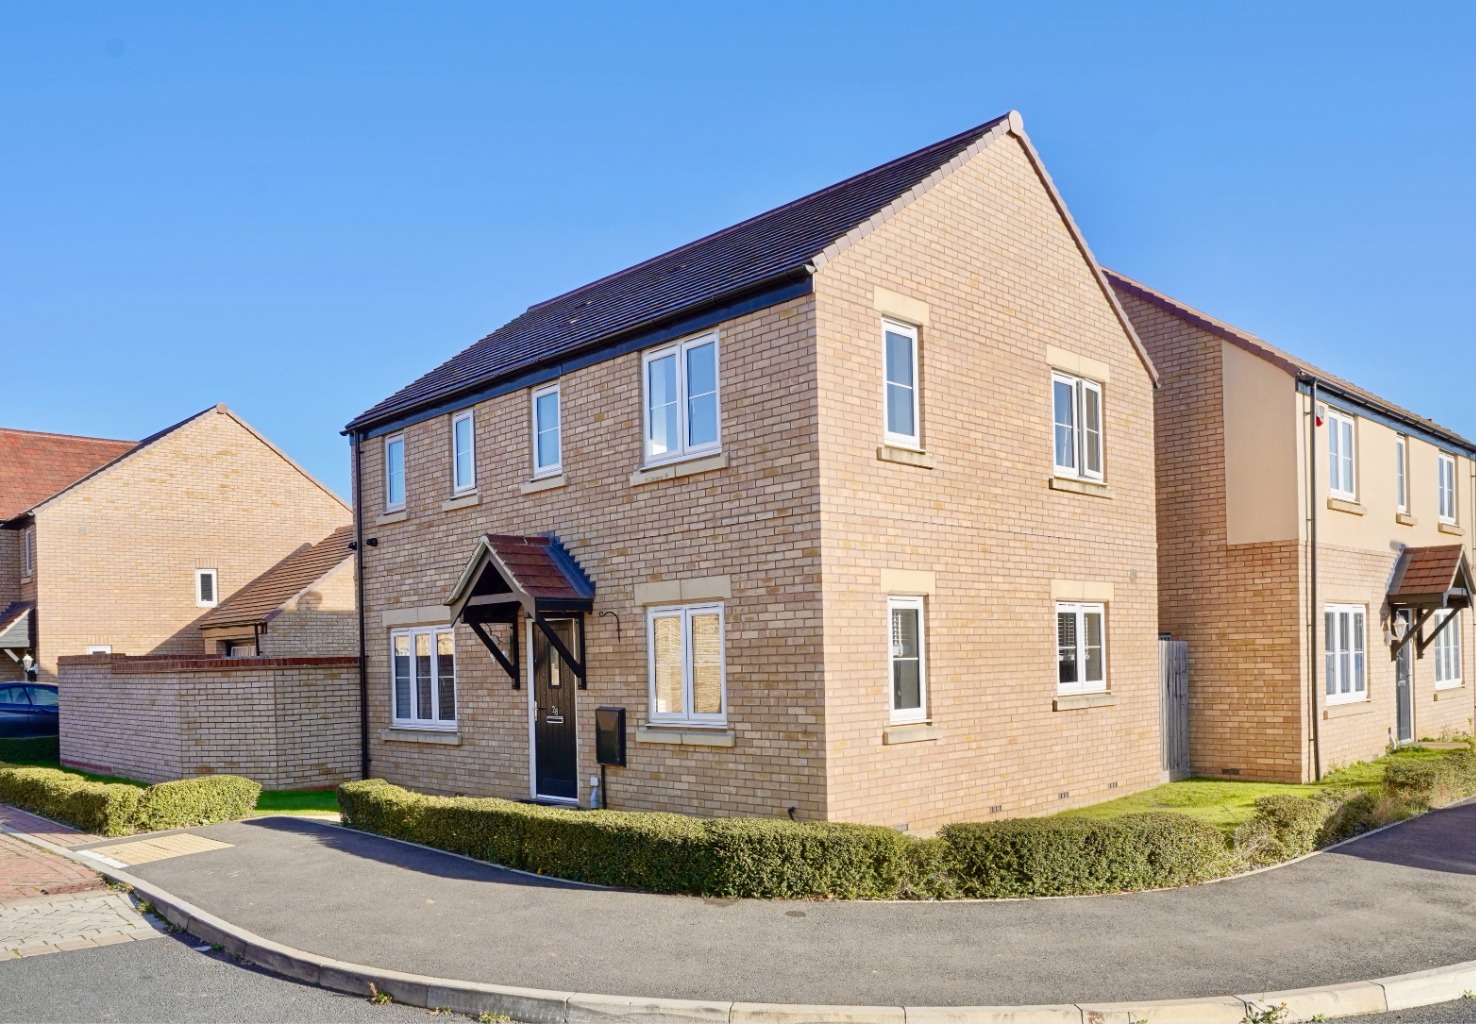 3 bed detached house for sale in Apple Tree Close, Huntingdon - Property Image 1